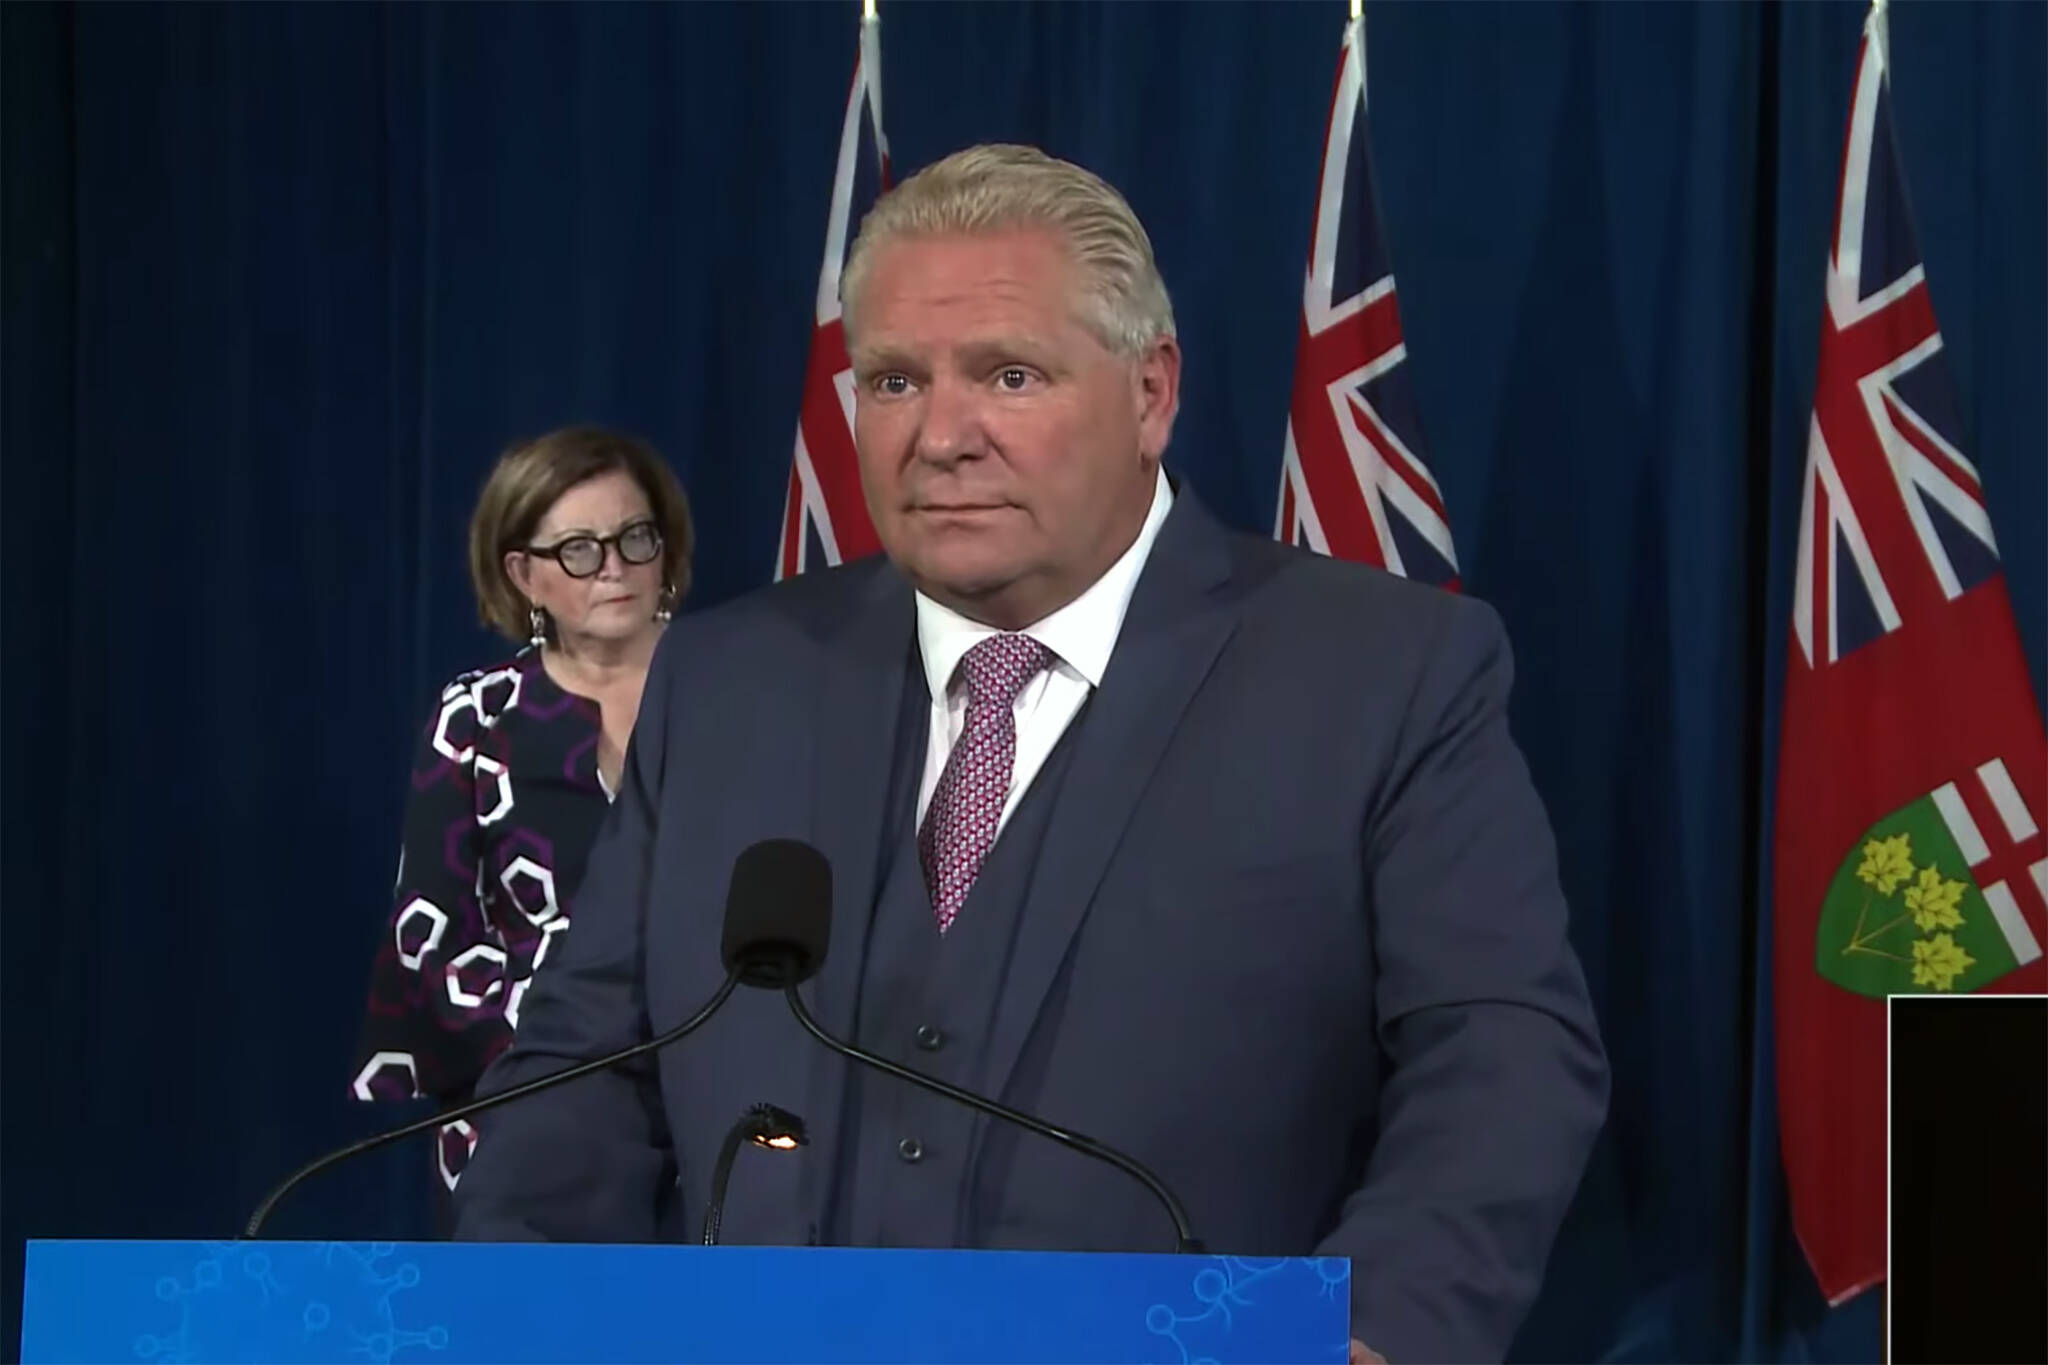 Doug Ford Just Called Covid 19 Crappy And Then Apologized For His Language